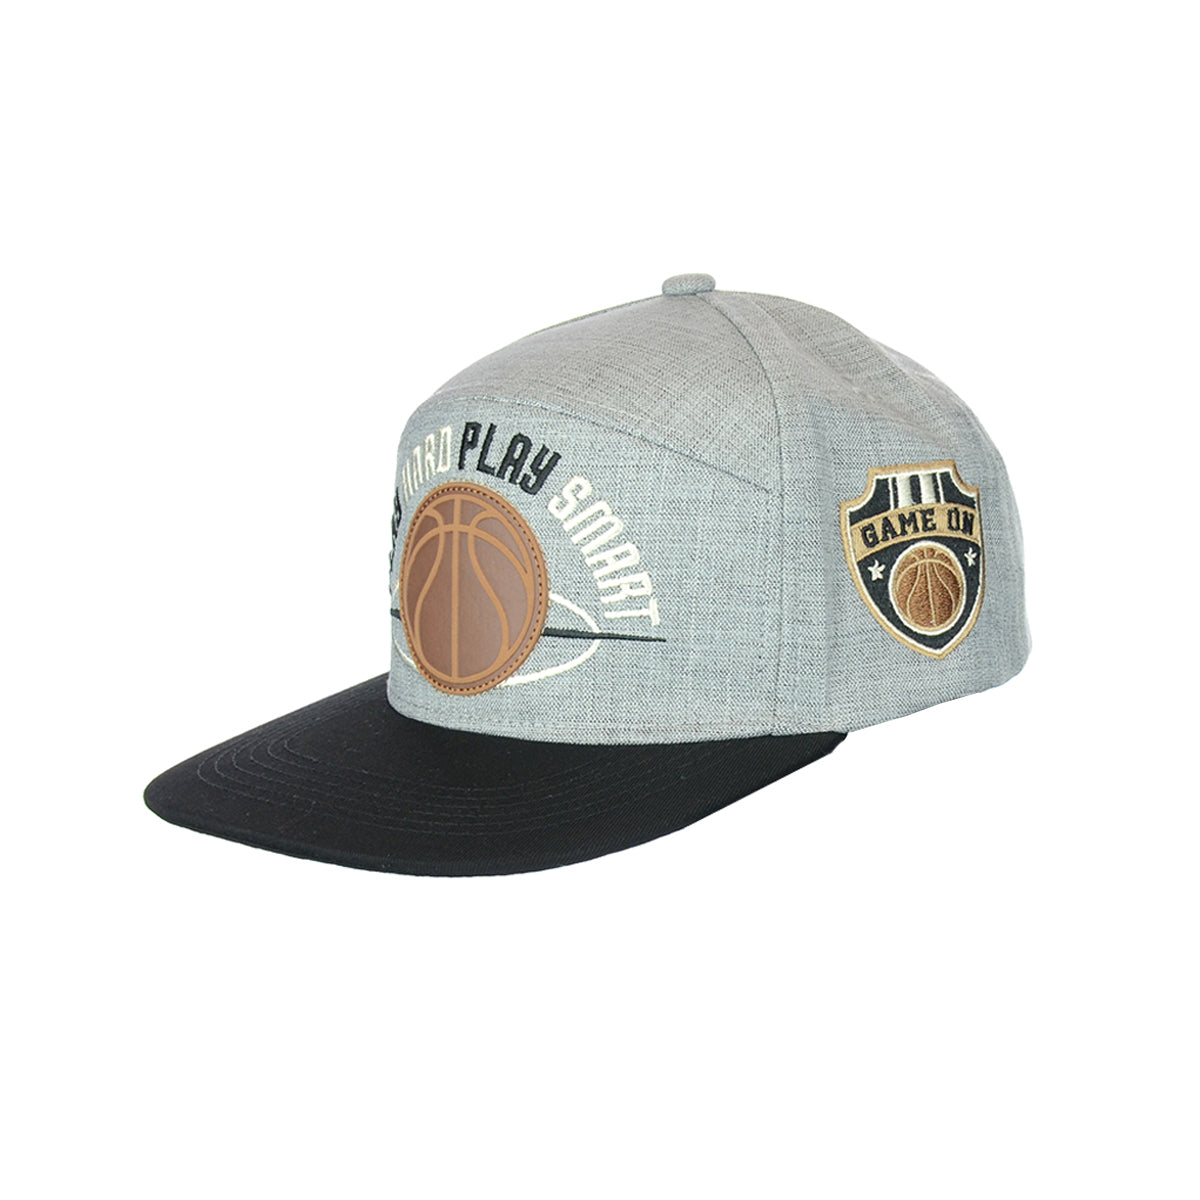 Snapback "Play Hard Play Smart" Hat Embroidered